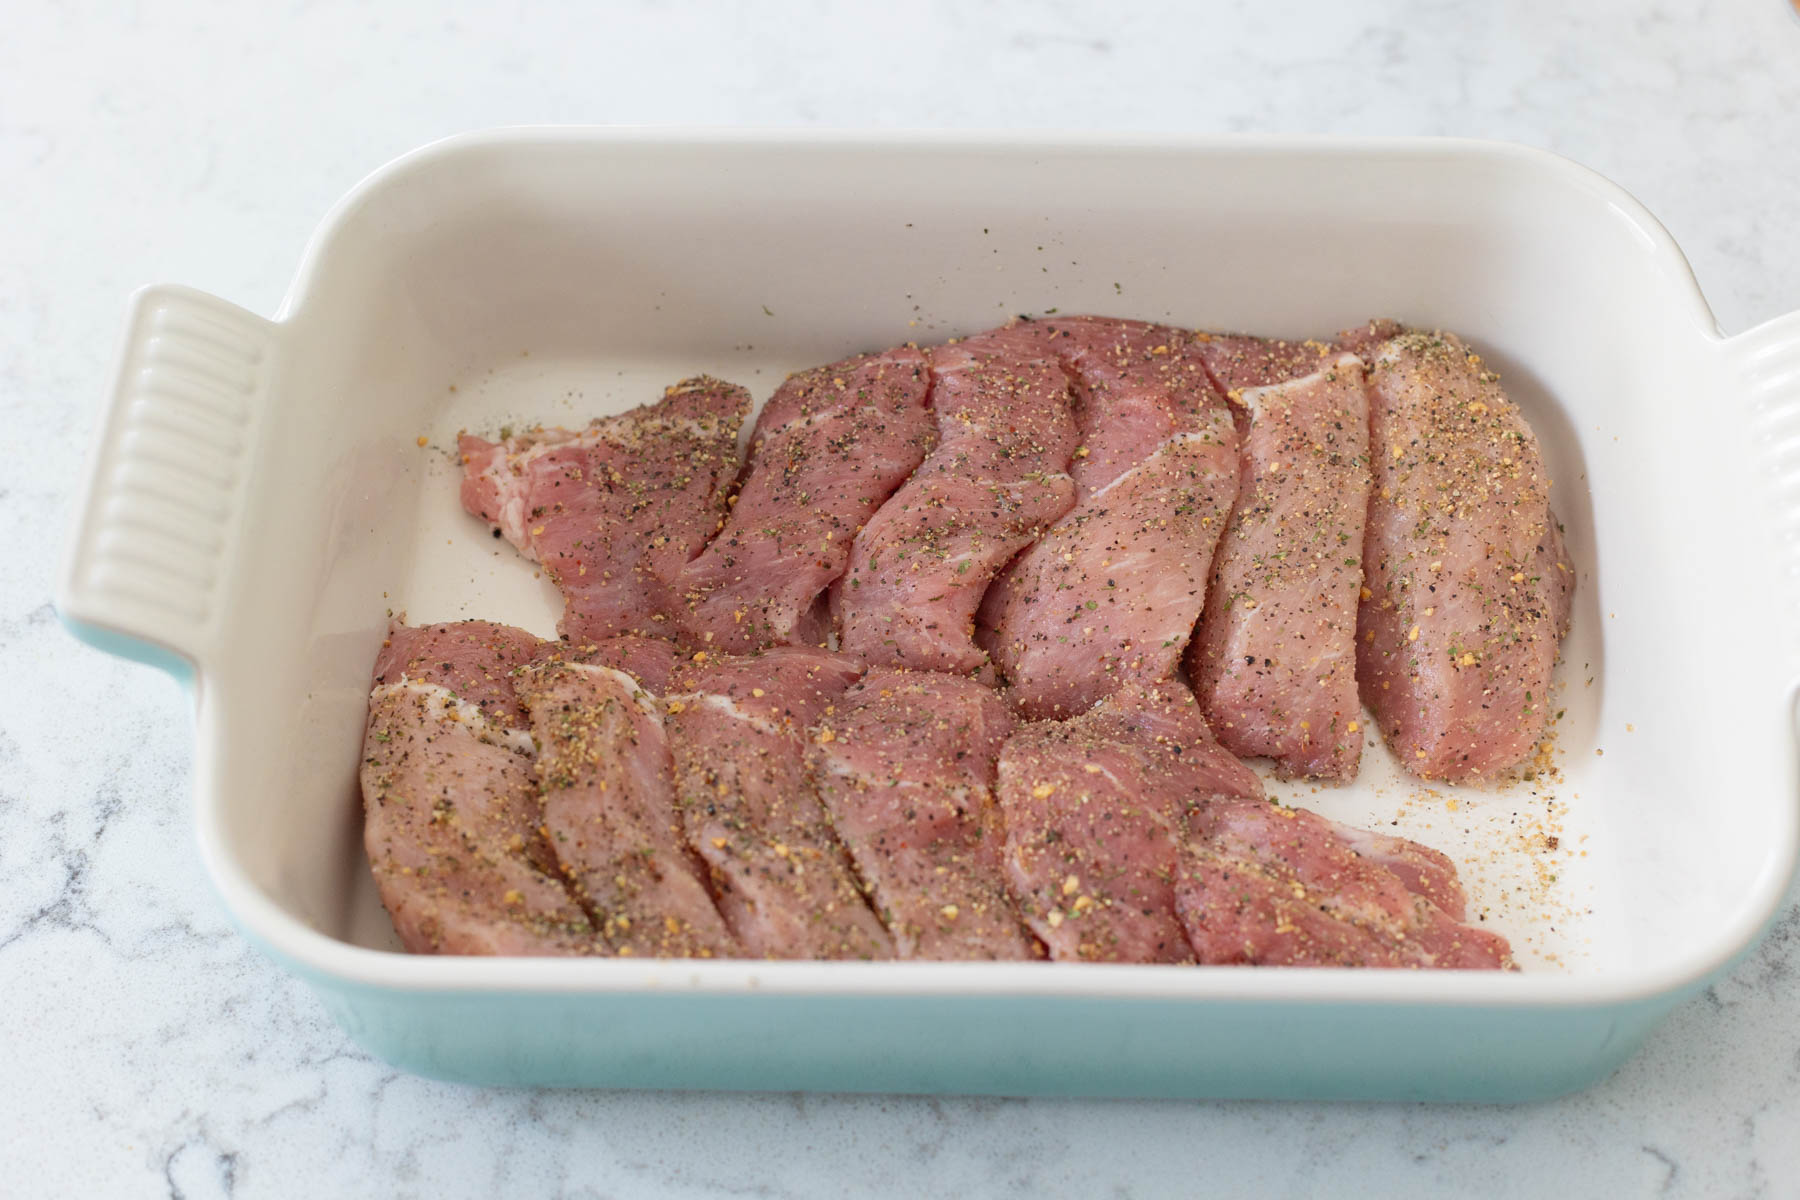 The pork has been coated in seasoning and placed in a baking dish.